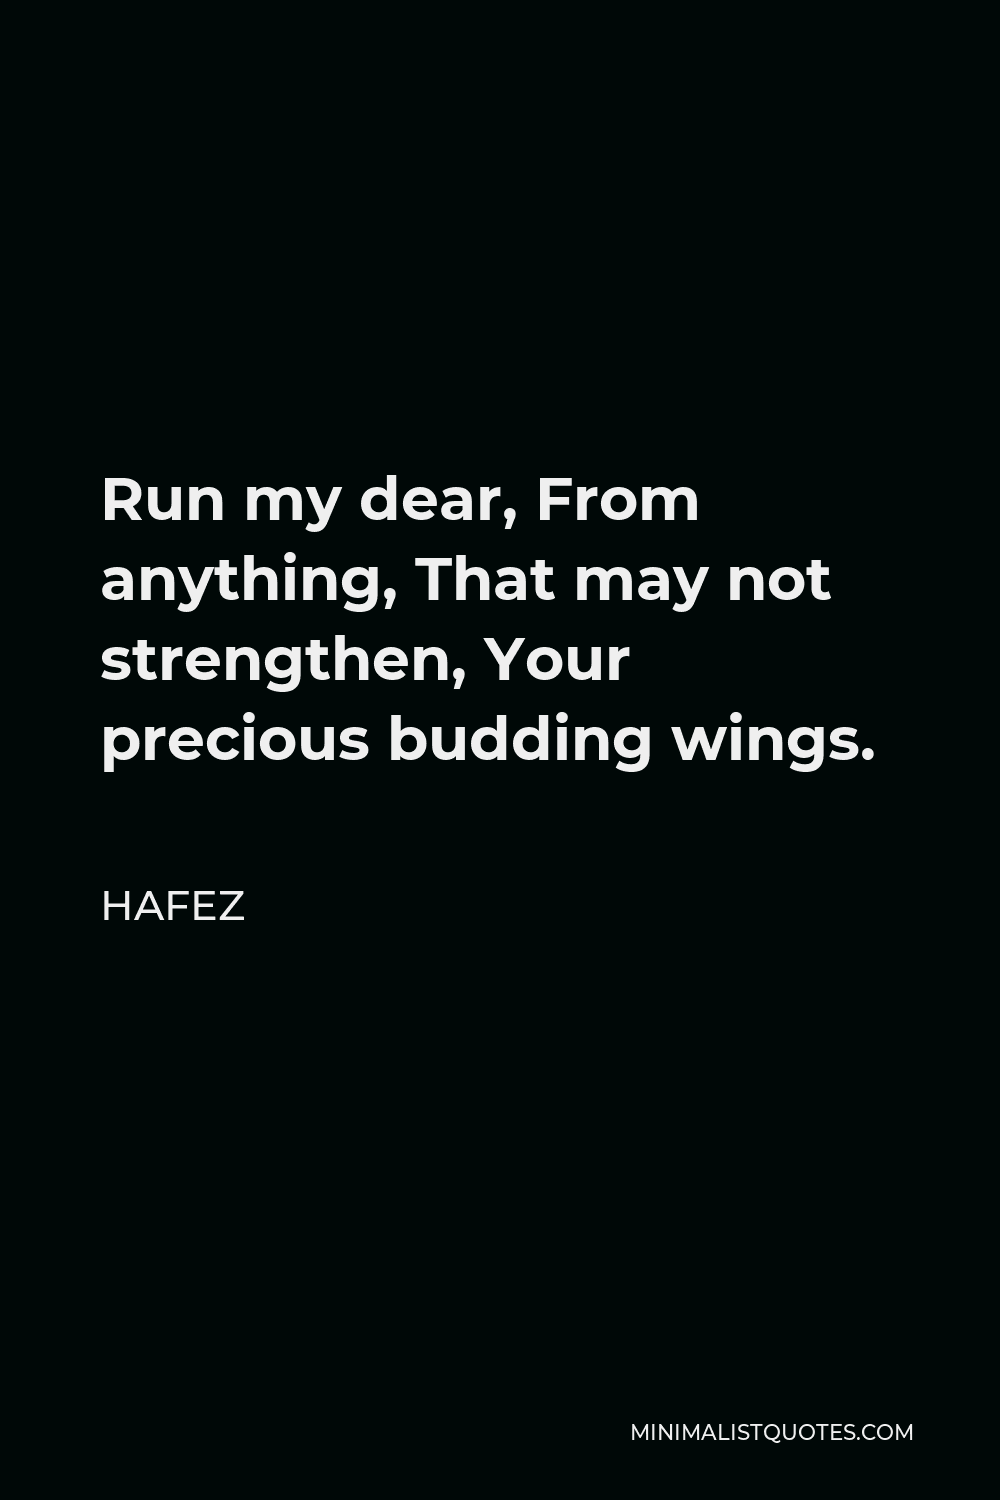 Hafez Quote - Run my dear, from anything that may not strengthen your precious budding wings. Run like hell my dear, from anyone likely to put a sharp knife into the sacred, tender vision of your beautiful heart.